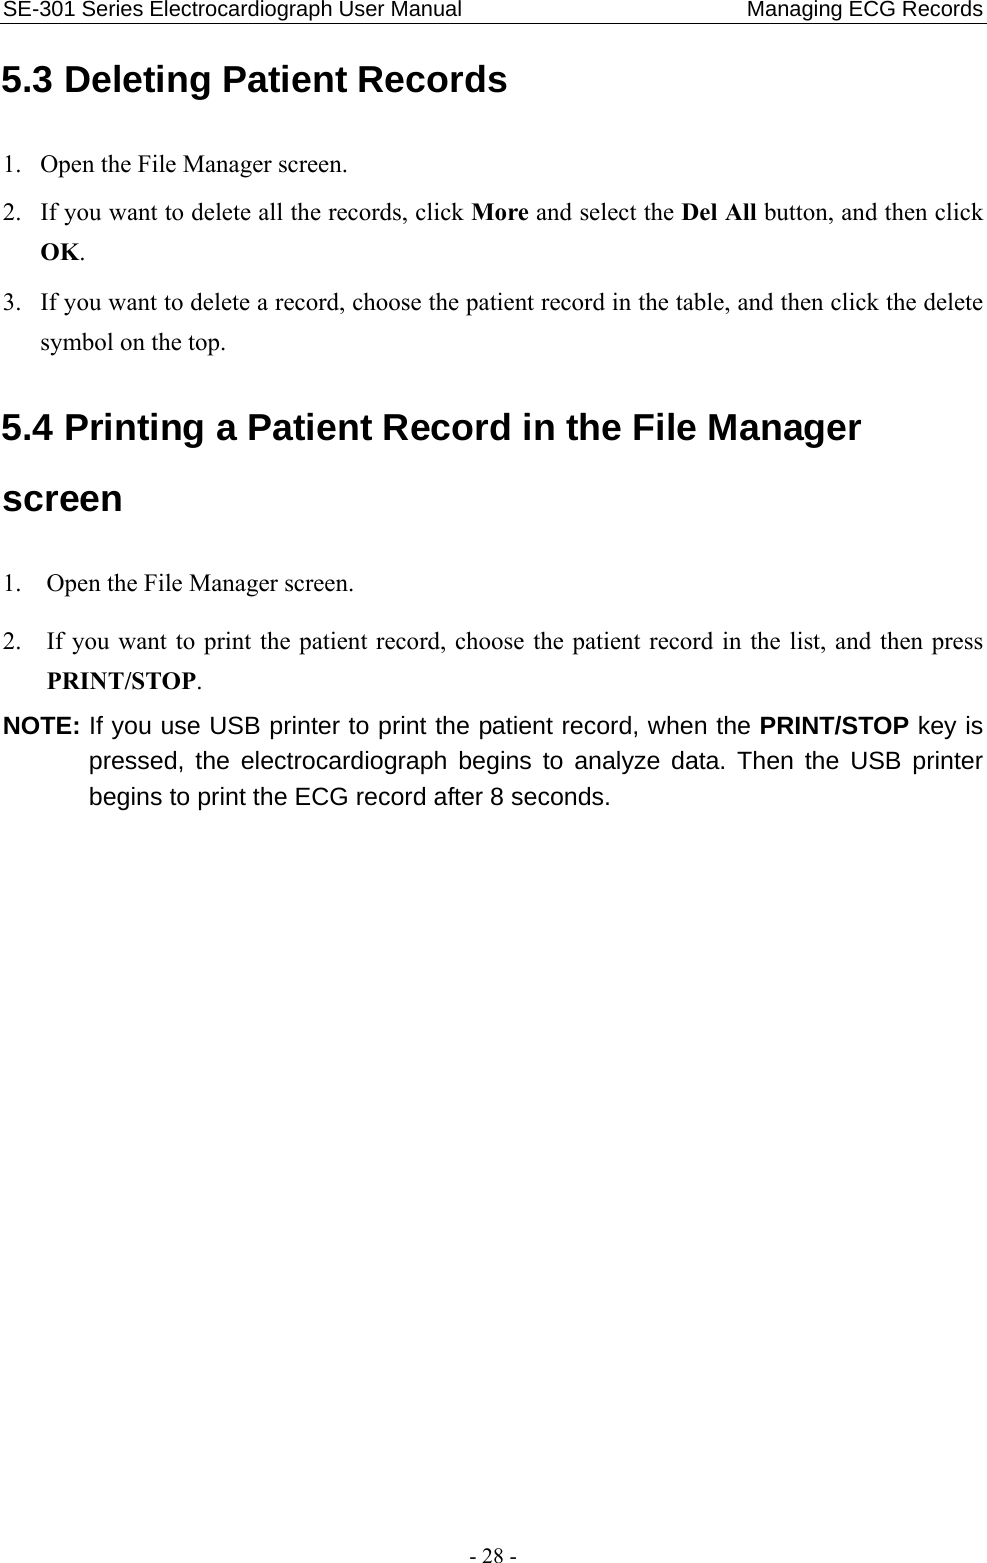 SE-301 Series Electrocardiograph User Manual                          Managing ECG Records - 28 - 5.3 Deleting Patient Records 1. Open the File Manager screen. 2. If you want to delete all the records, click More and select the Del All button, and then click OK. 3. If you want to delete a record, choose the patient record in the table, and then click the delete symbol on the top. 5.4 Printing a Patient Record in the File Manager screen 1. Open the File Manager screen. 2. If you want to print the patient record, choose the patient record in the list, and then press PRINT/STOP. NOTE: If you use USB printer to print the patient record, when the PRINT/STOP key is pressed, the electrocardiograph begins to analyze data. Then the USB printer begins to print the ECG record after 8 seconds. 